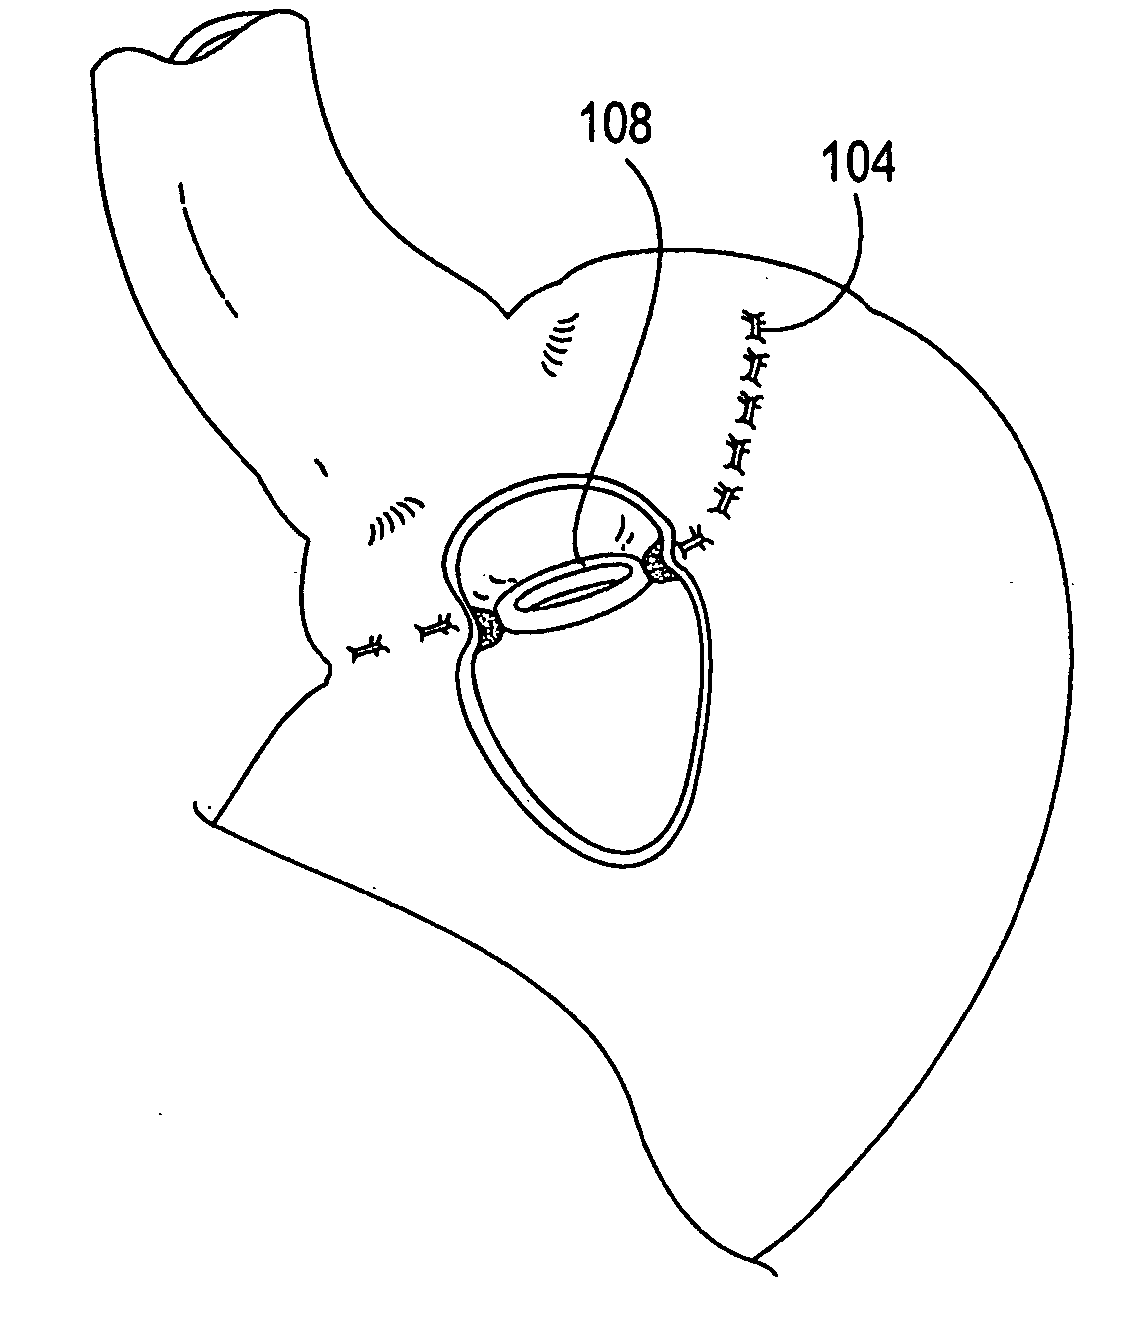 Gastrointestinal sleeve device and methods for treatment of morbid obesity